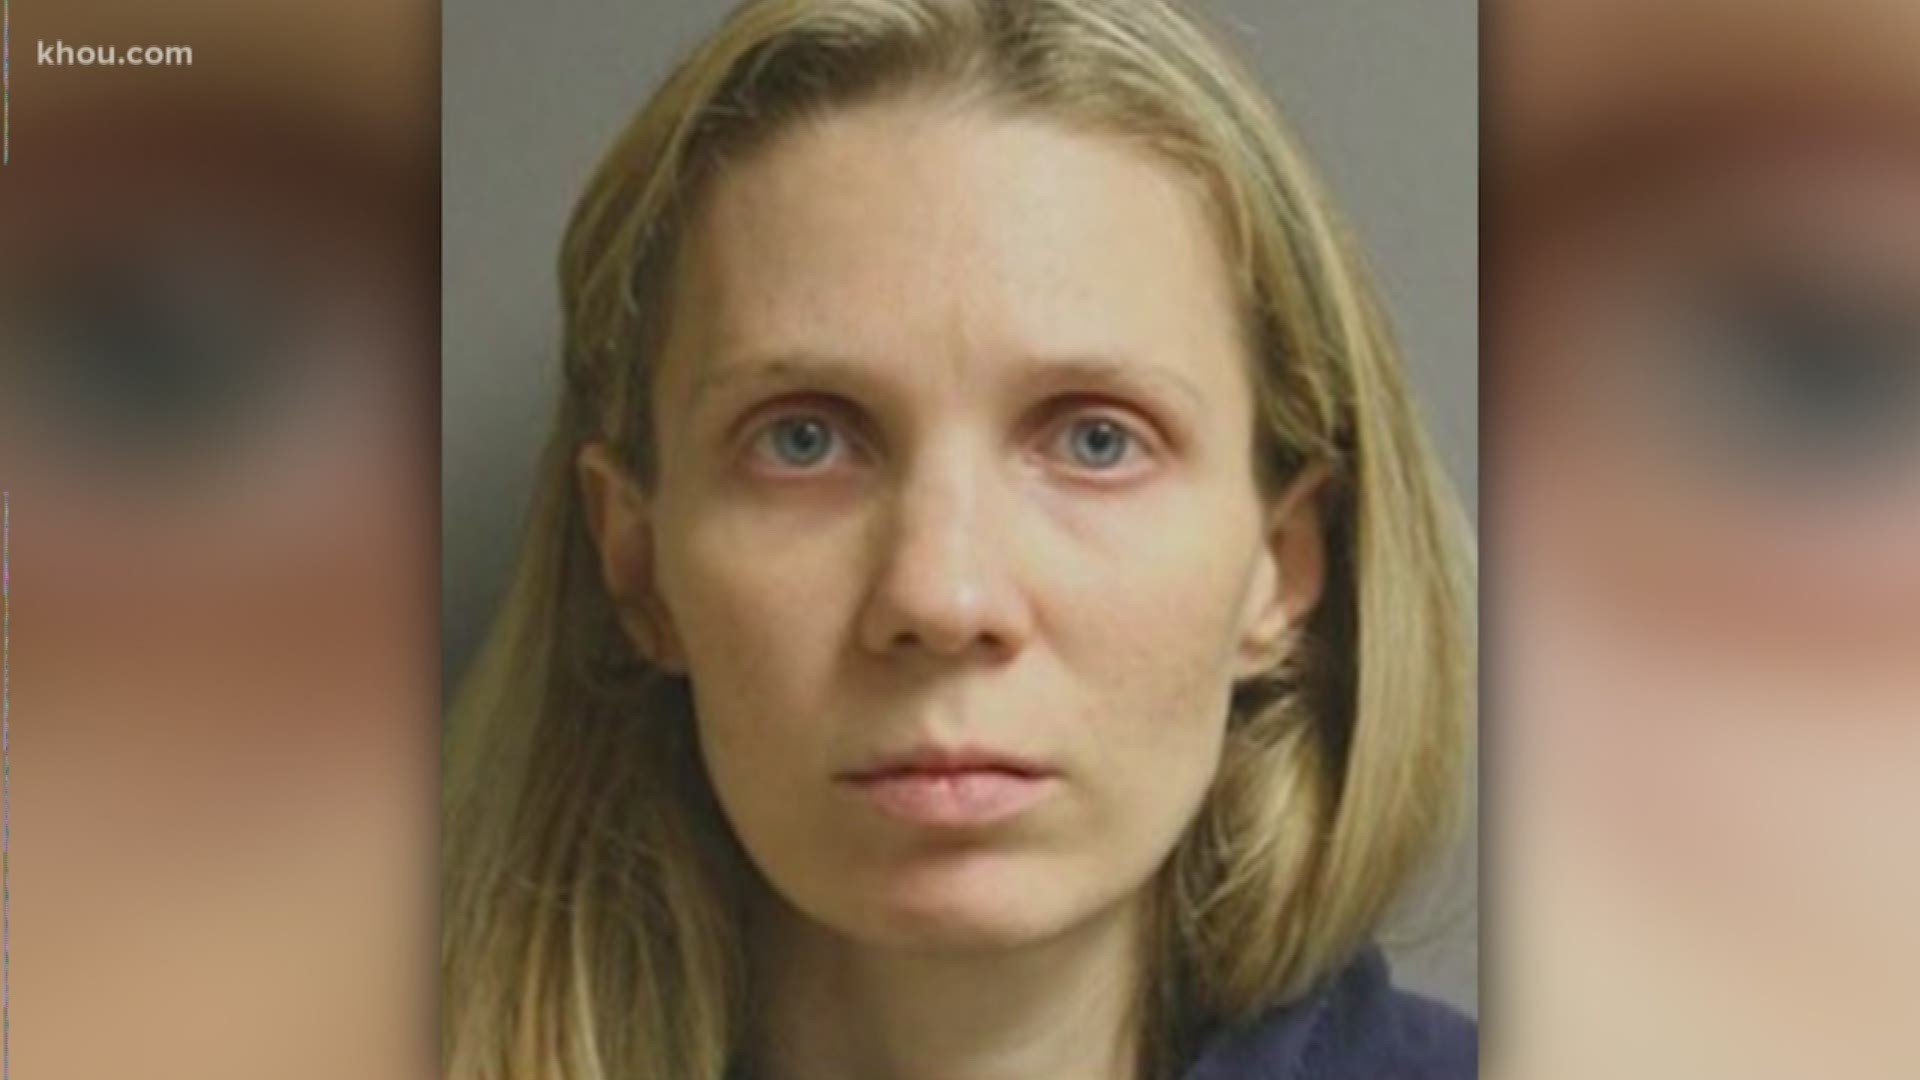 The stepmother convicted of endangering and injuring a small child found beaten and malnourished inside a stairway closet has been sentenced to 28 years in prison.